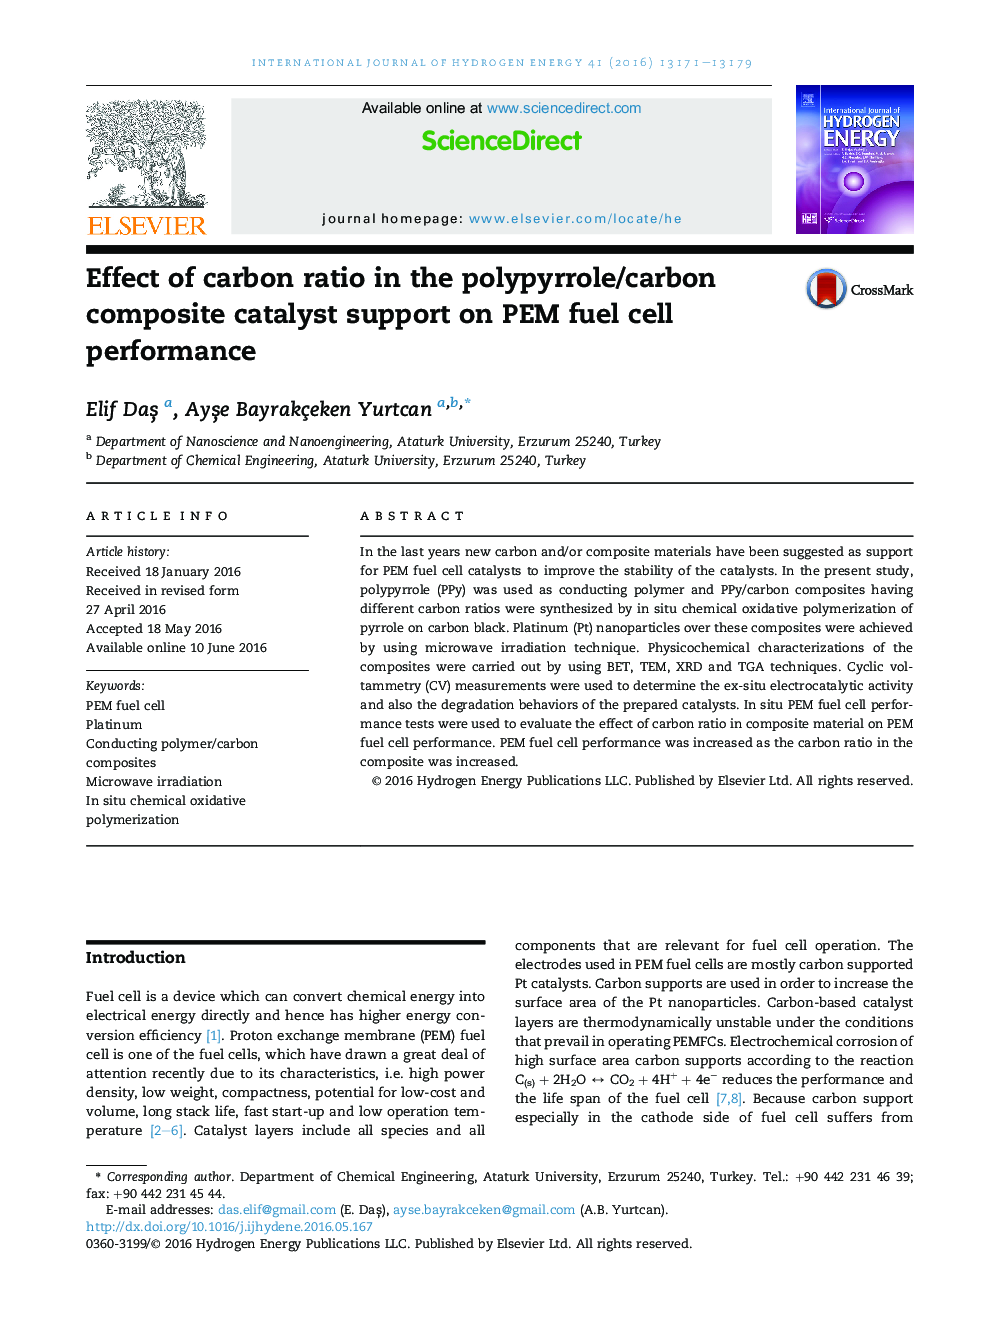 Effect of carbon ratio in the polypyrrole/carbon composite catalyst support on PEM fuel cell performance